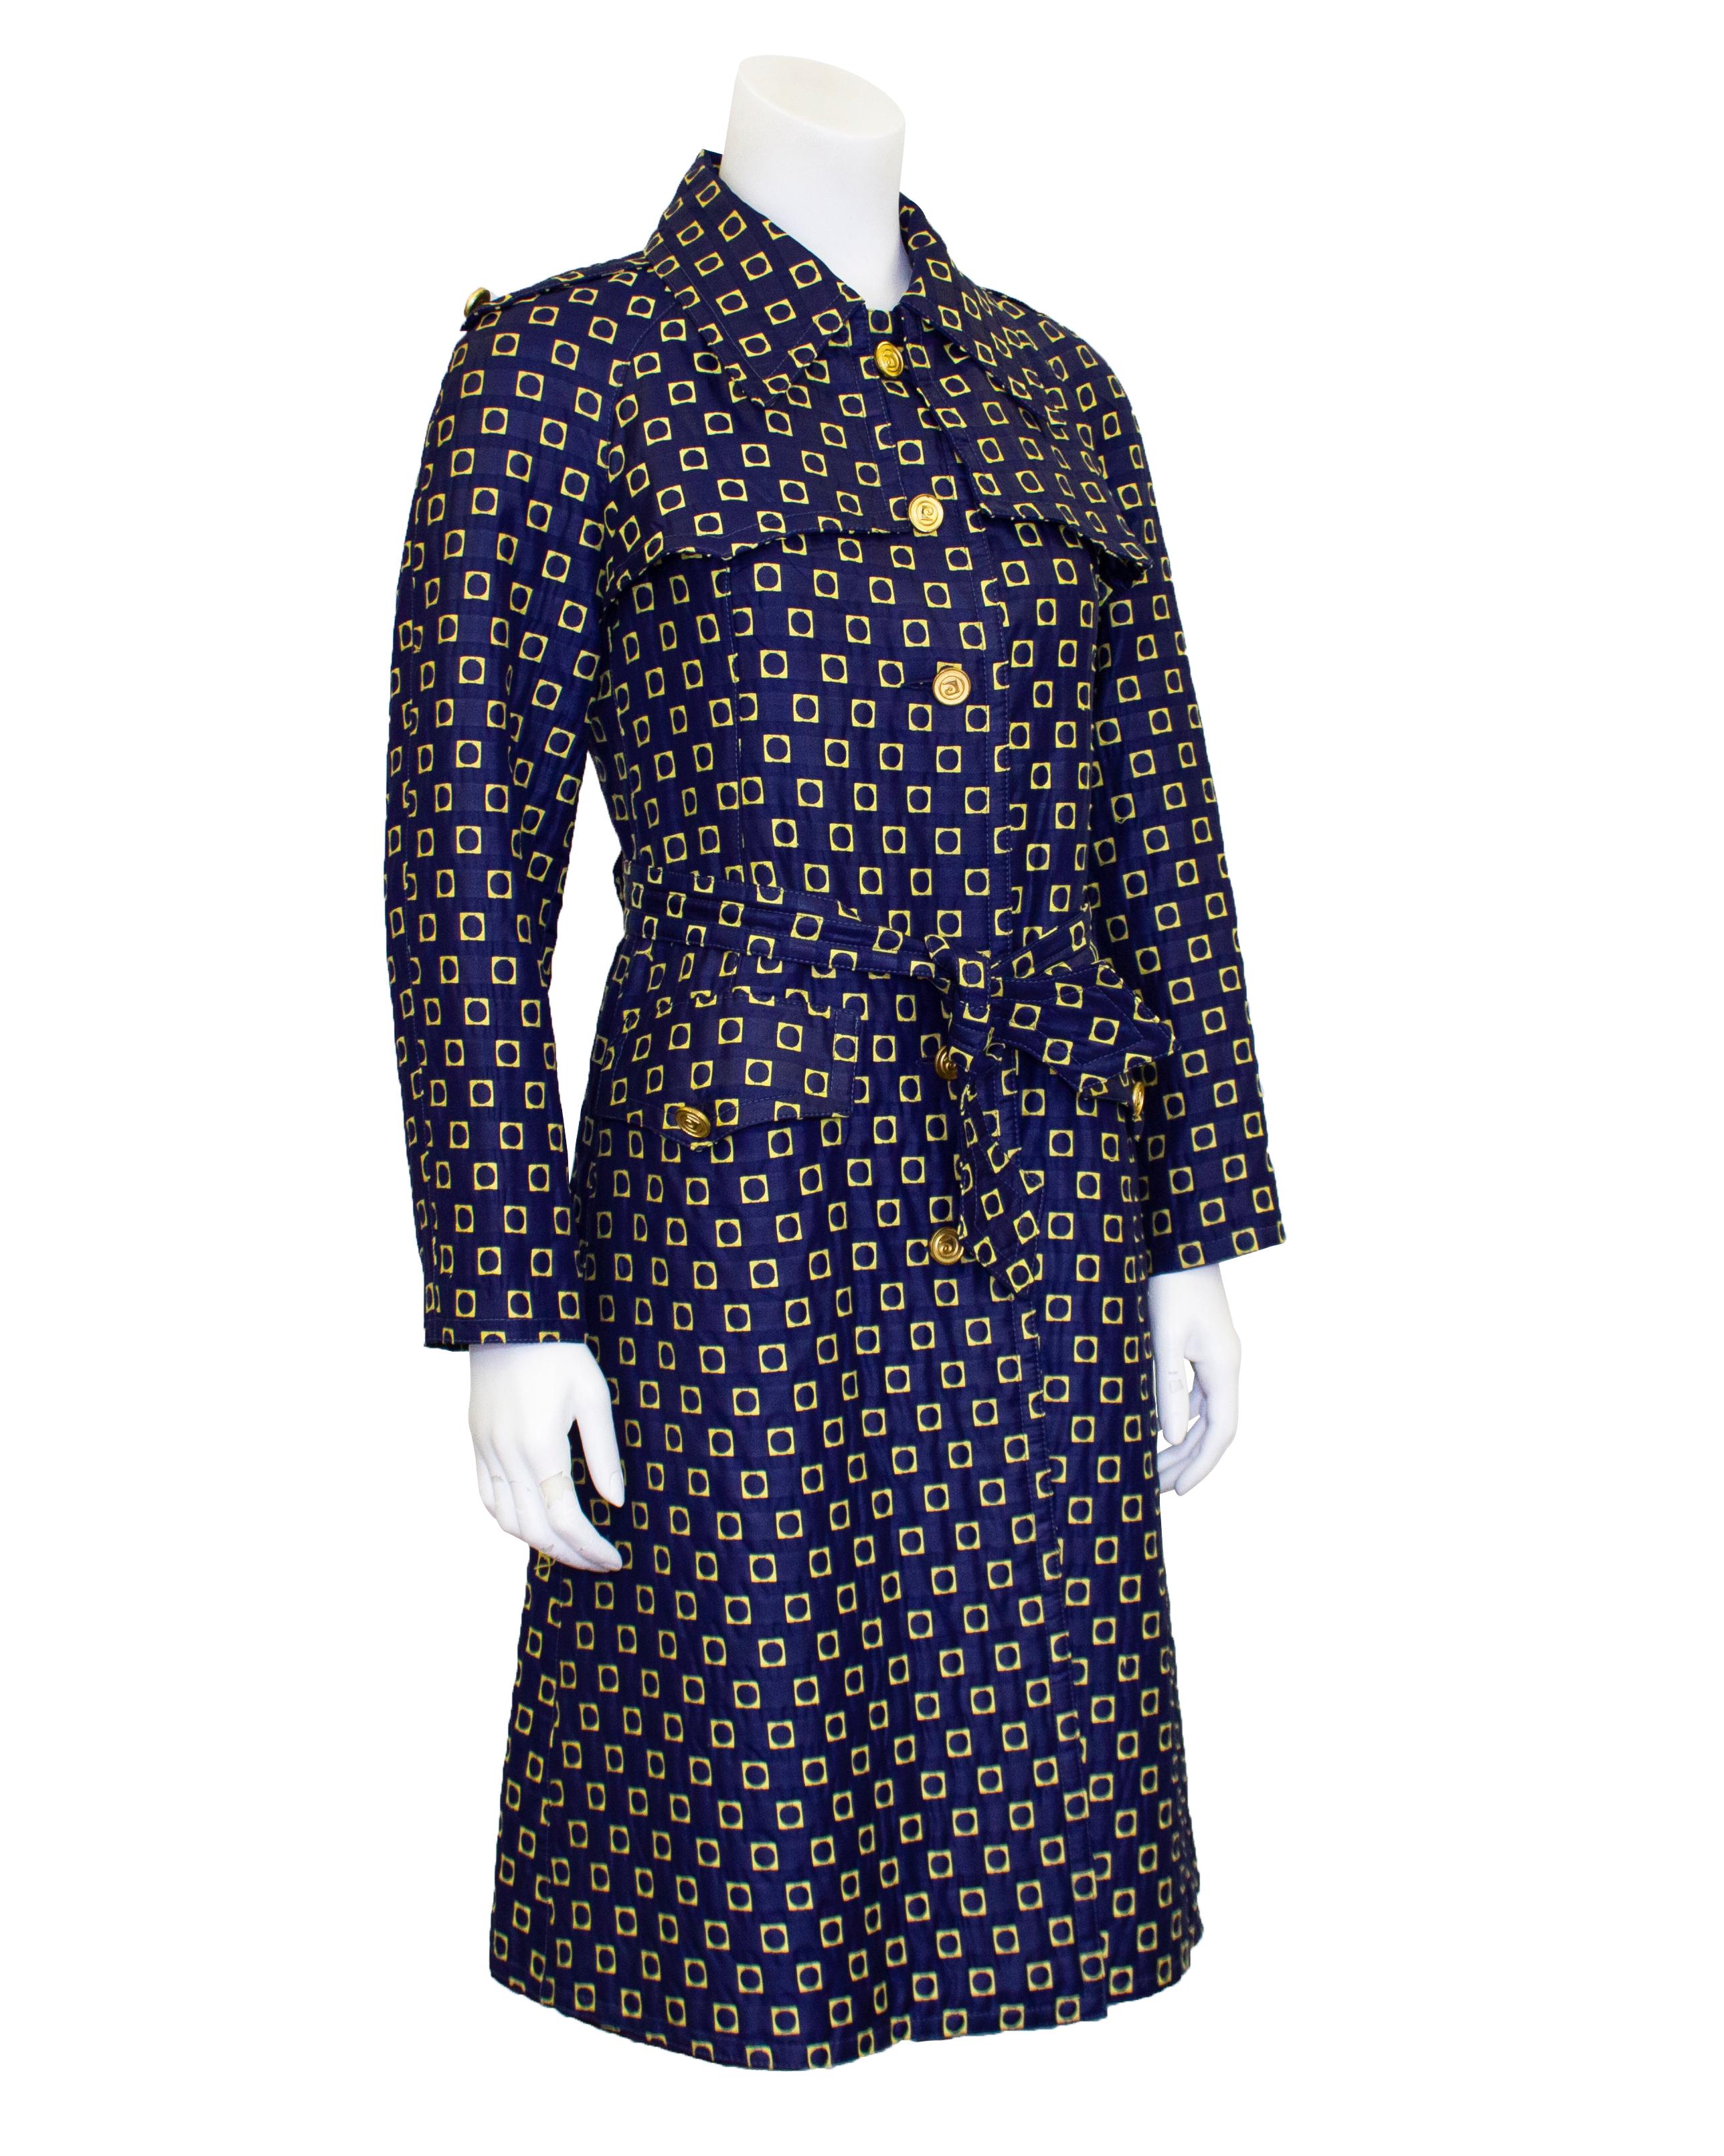 Mod 1970s Pierre Cardin trench coat. Navy blue cotton brocade with all over geometric yellow squares that have rounded interiors. Round gold tone metal buttons with the Pierre Cardin logo. Classic trench coat shape with front and back vents,